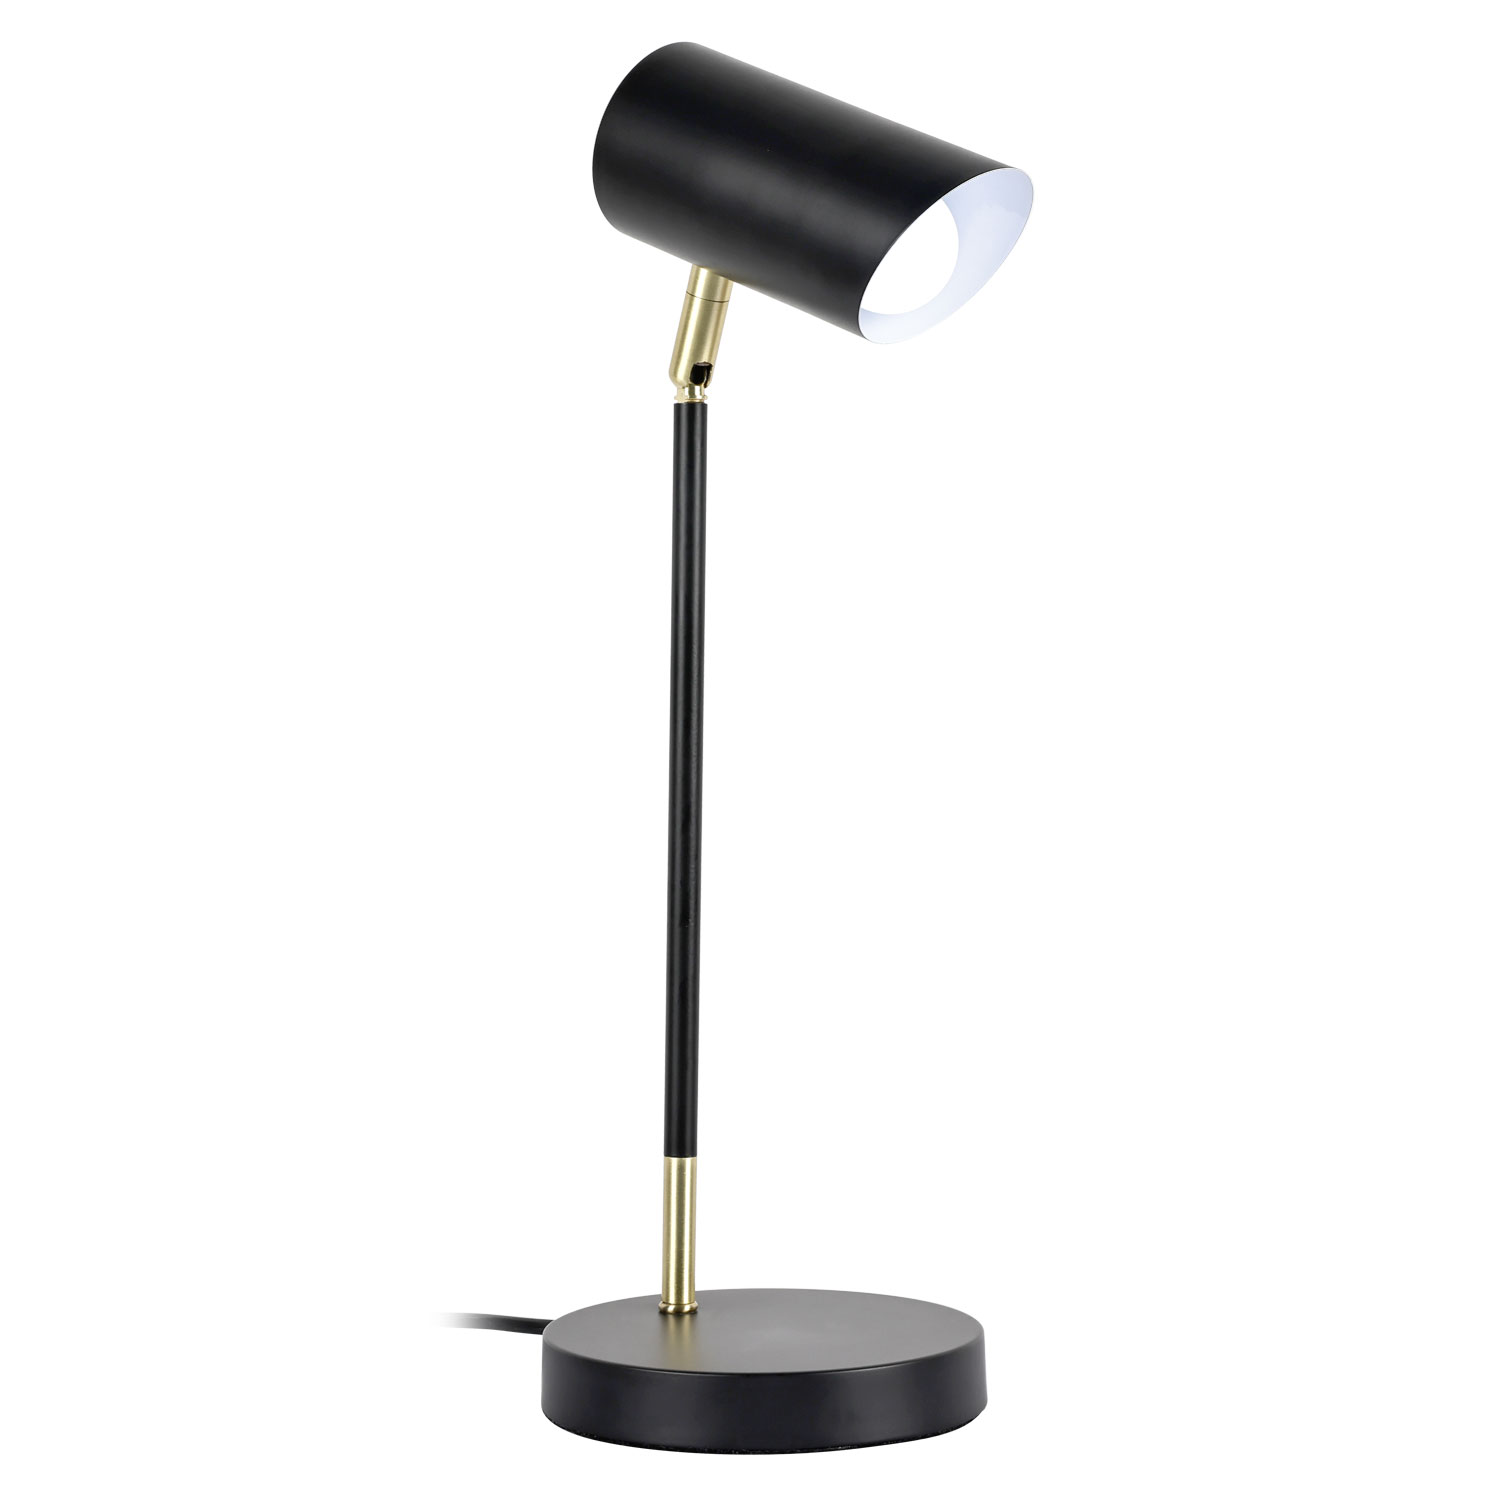 Metal table lamp for reading room